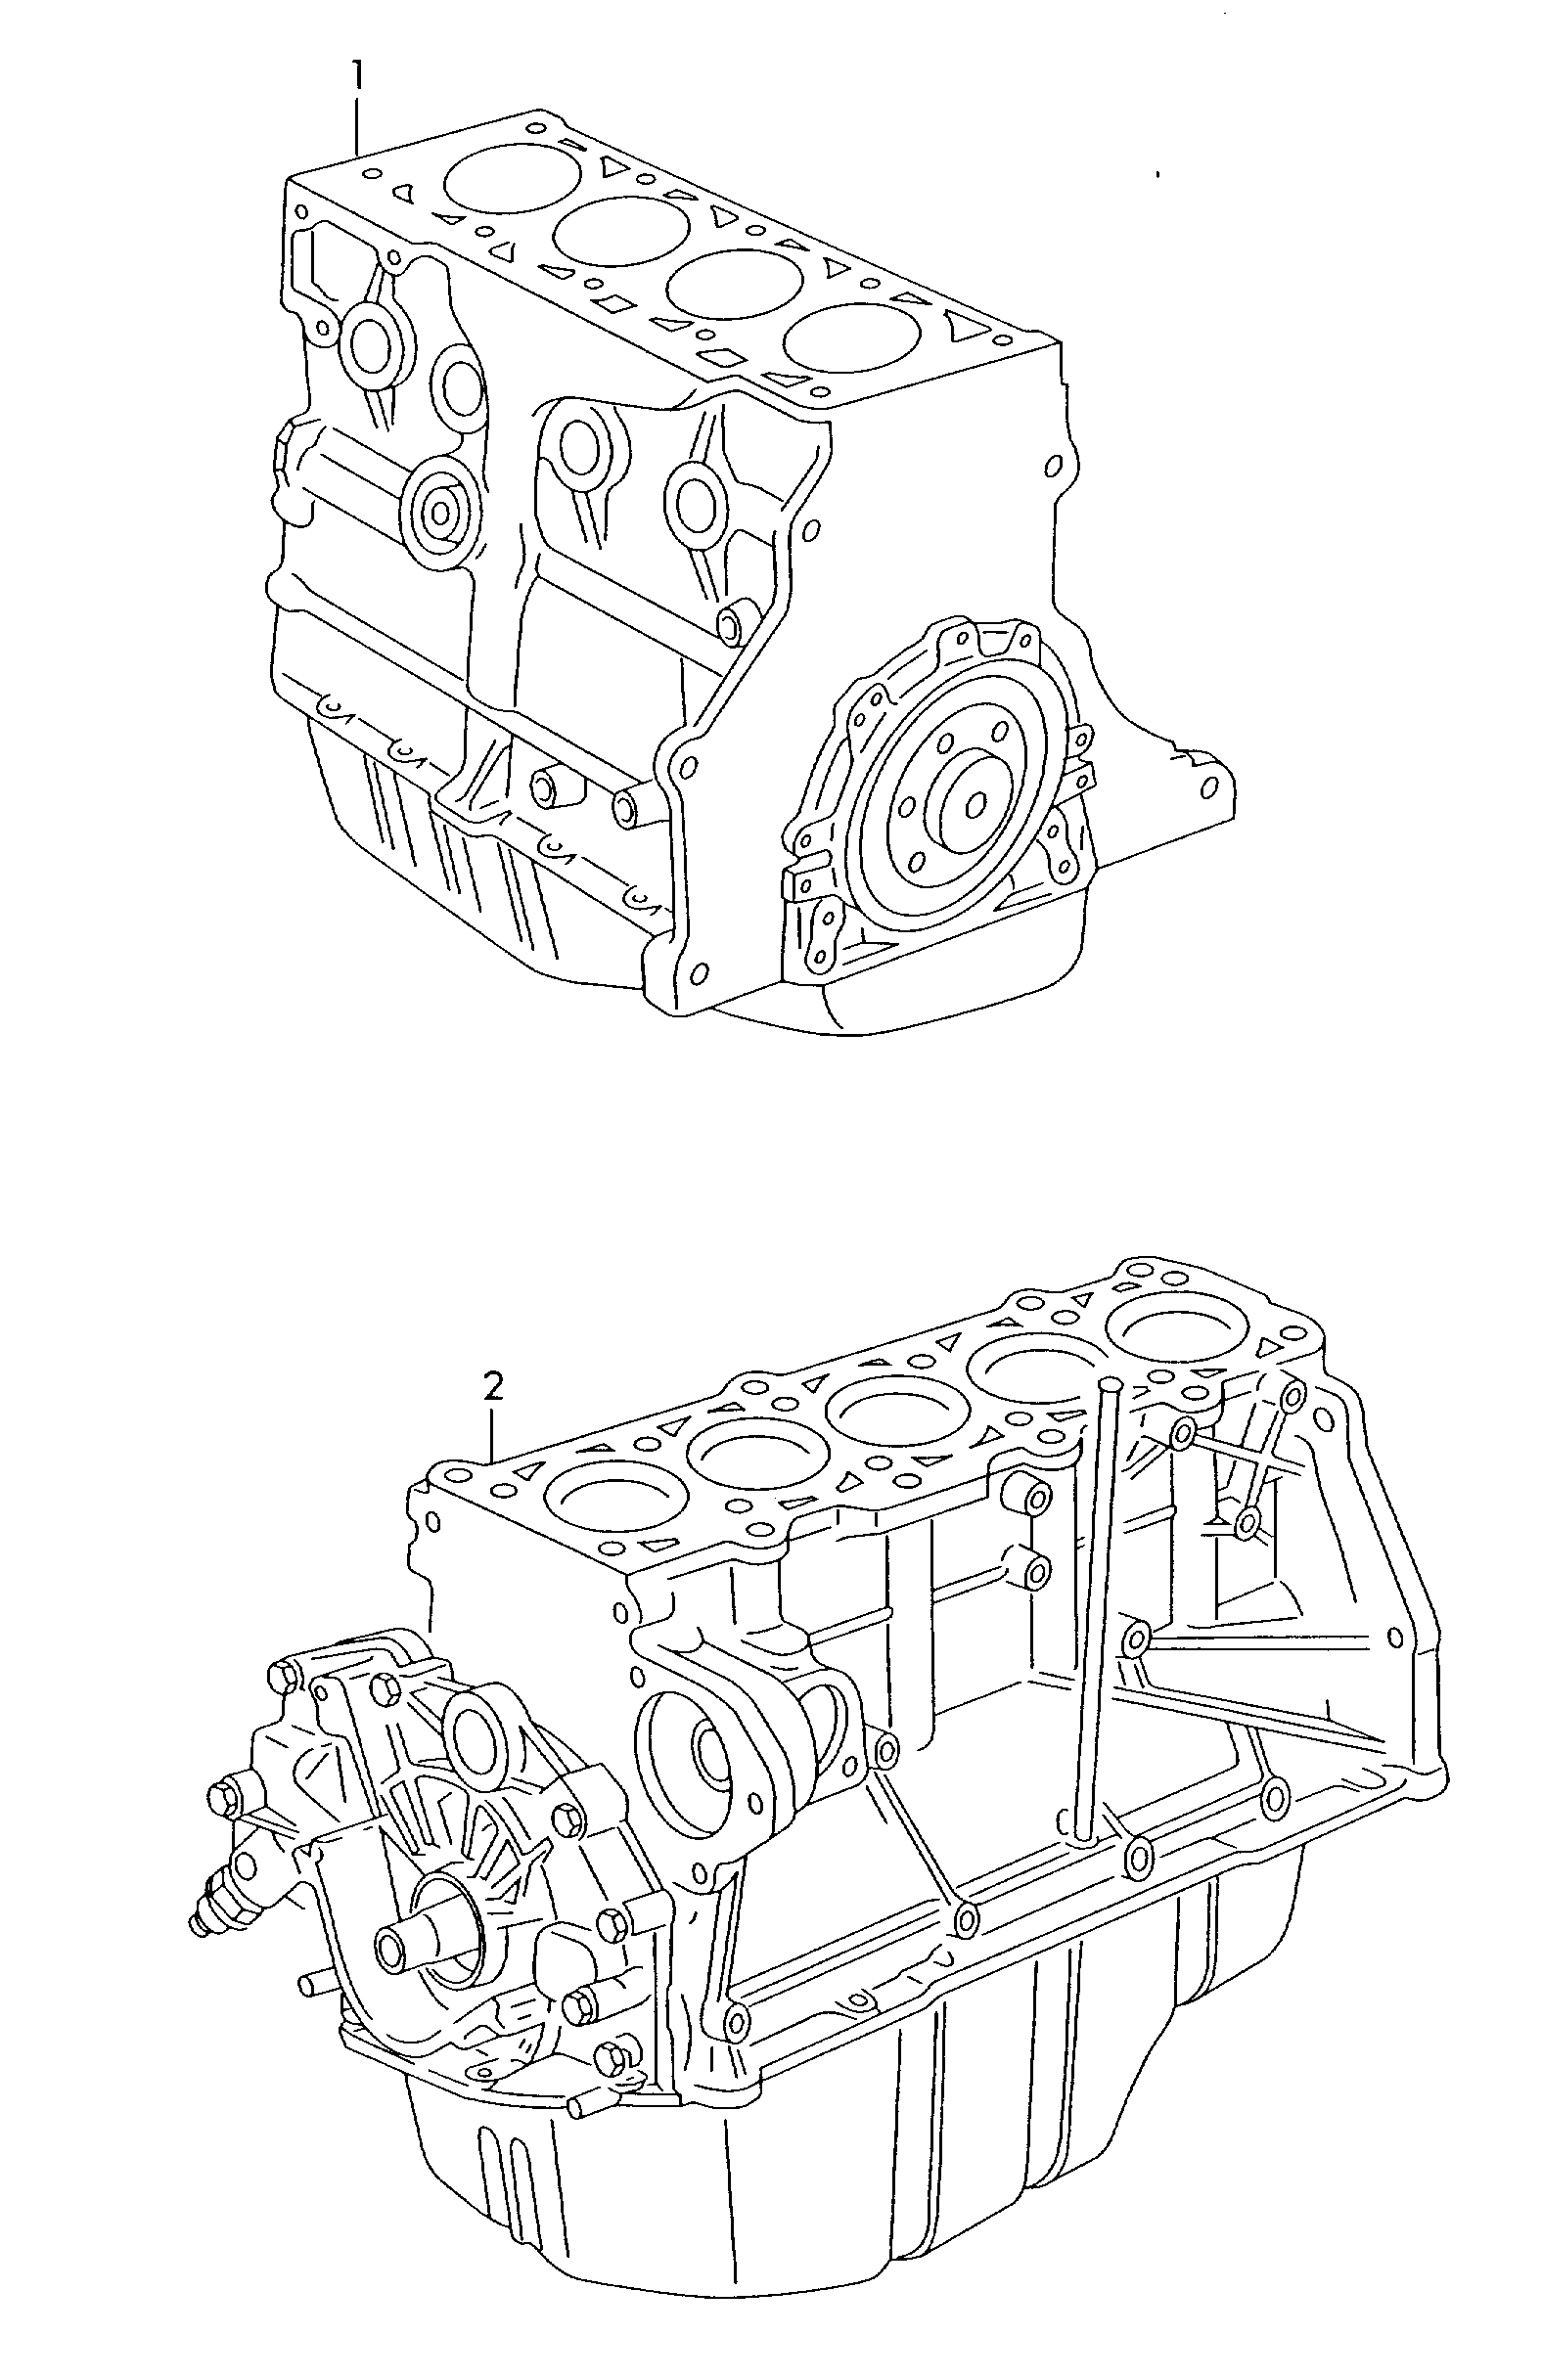 short engine with crankshaft,<br>pistons, oil pump and oil sump  - Typ 2 - t2